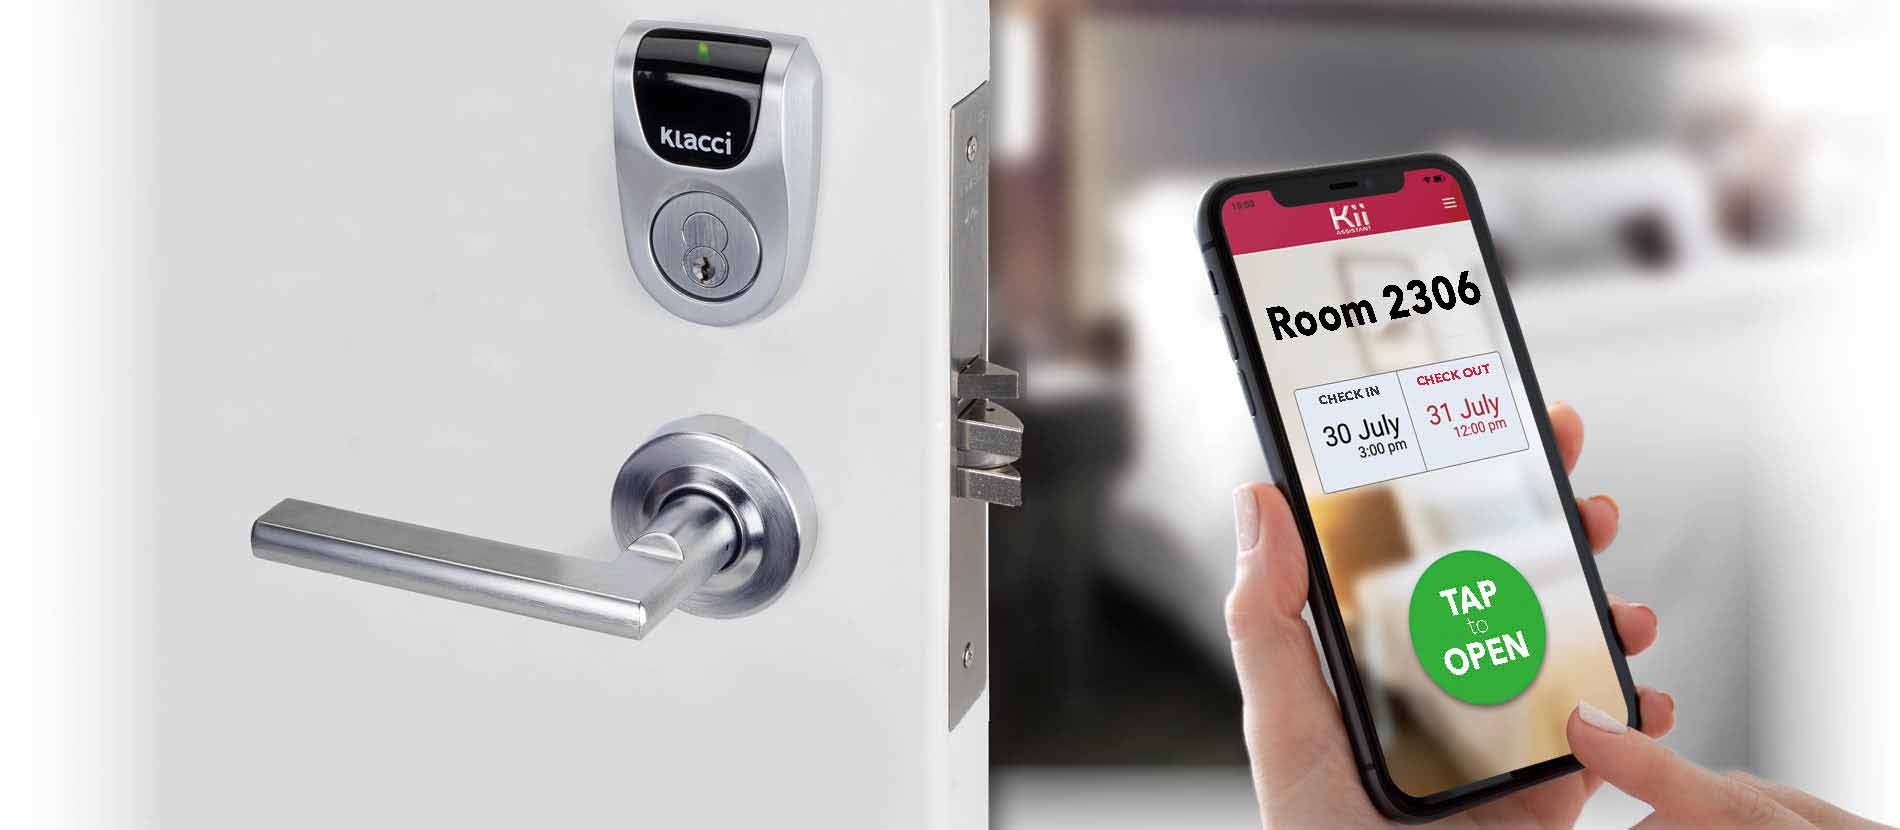 Klacci iF Series Mobile Biometrics Touchless Smart Lock iF-R9 Readers For Mortise Lock hotel